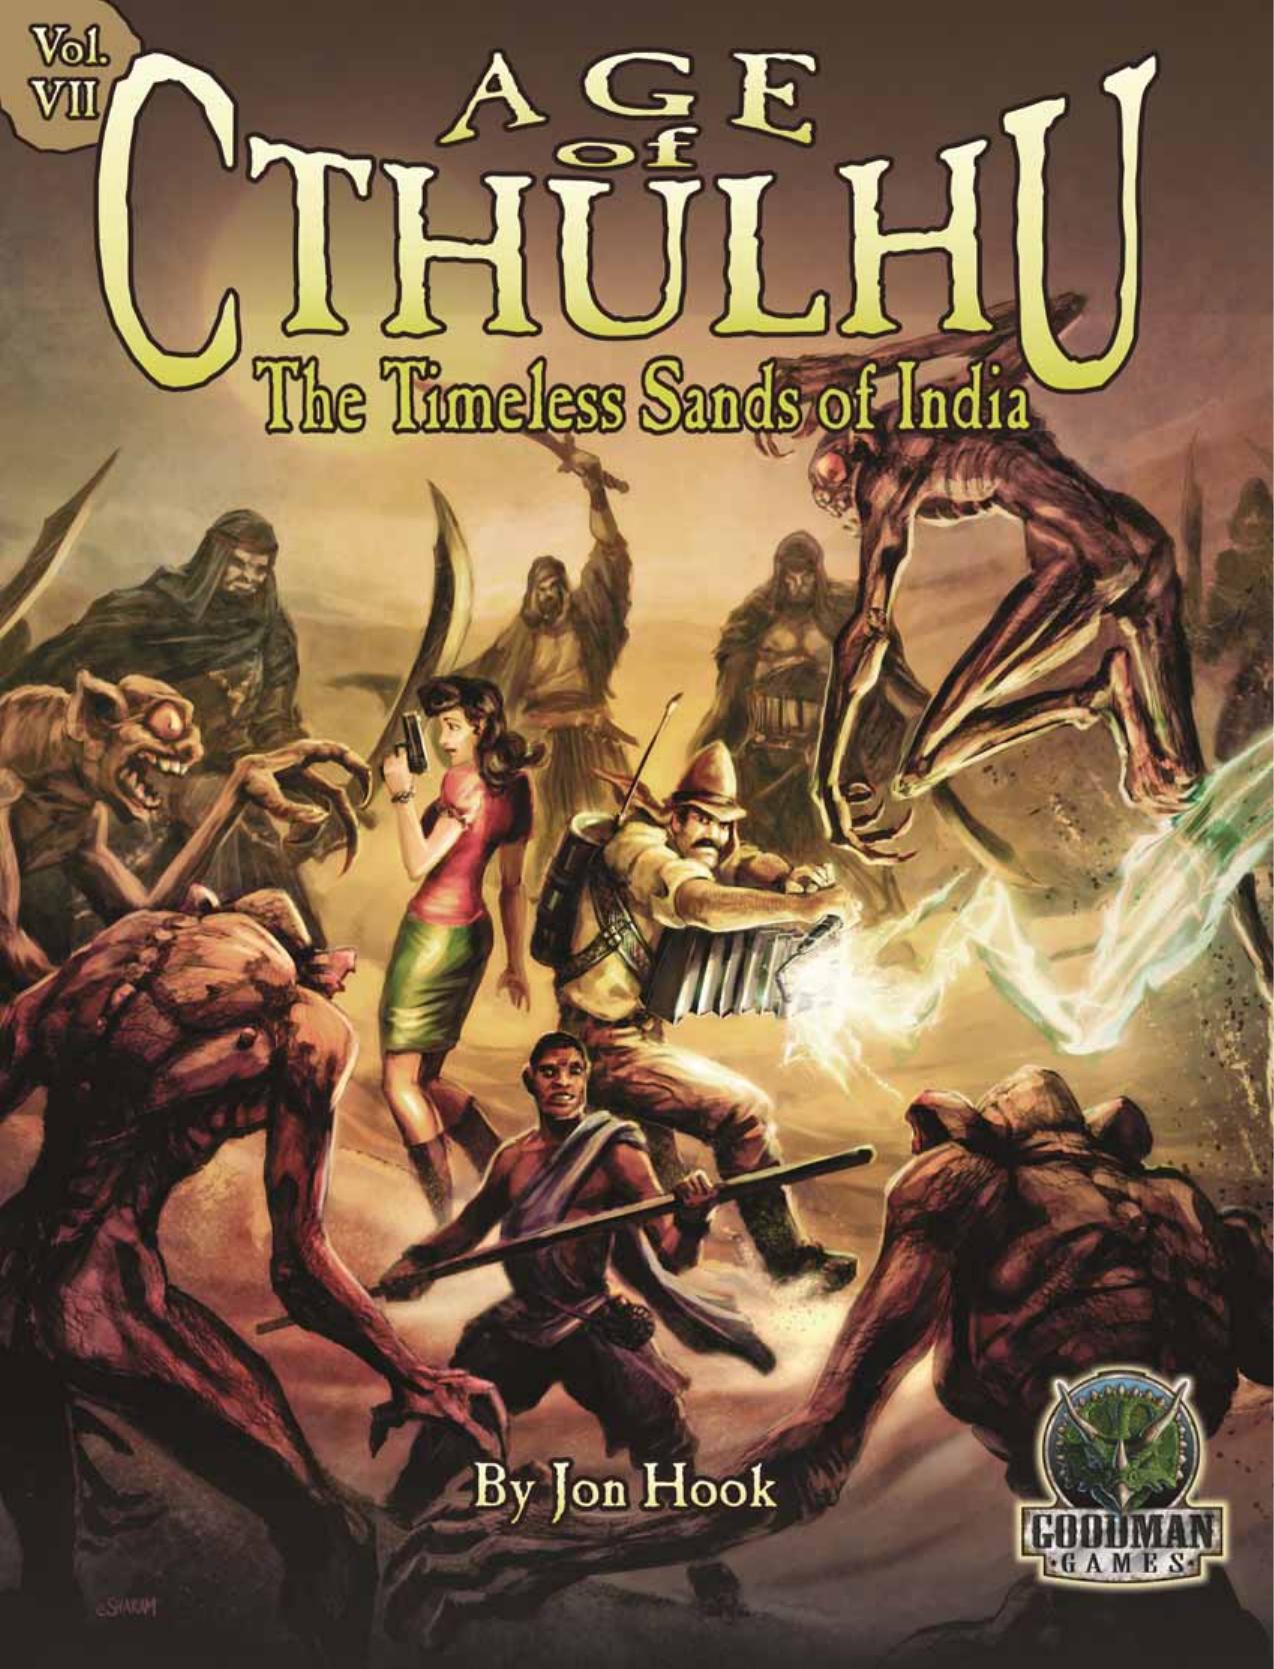 Age of Cthulhu Vol VII